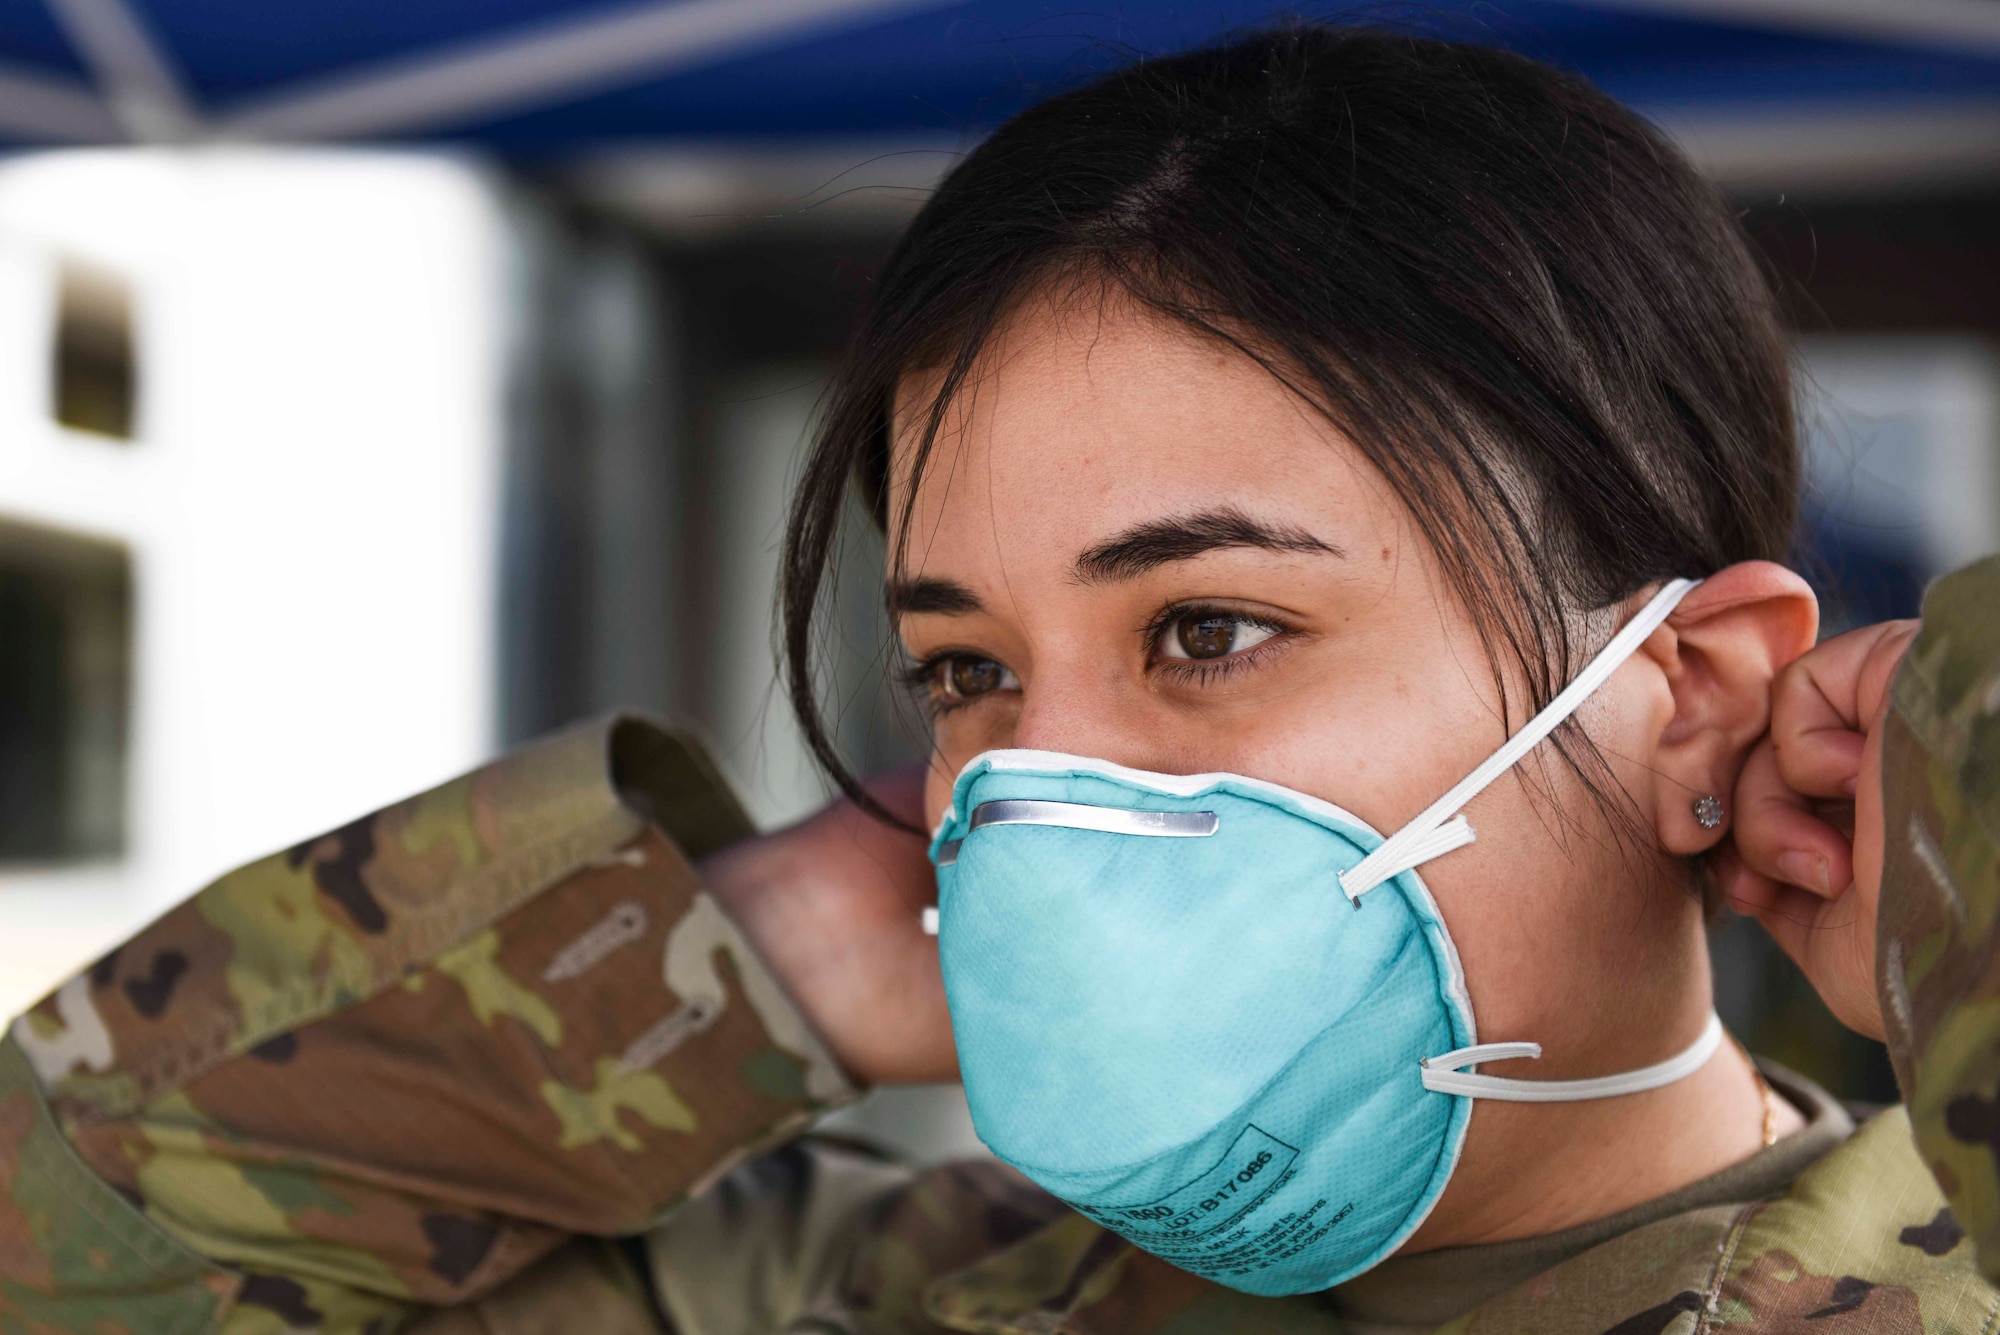 U.S. Air Force Staff Sgt. Melissa Lozada, 39th Medical Support Squadron resource management office non-commissioned officer in charge, dons a protective mask prior to screening visitors at the 39th Medical Group, March 20, 2020, at Incirlik Air Base, Turkey. Military and civilian officials at the 39th Air Base Wing are taking steps to curb the potential spread of the Coronavirus at Incirlik. (U.S. Air Force photo by Staff Sgt. Joshua Magbanua)